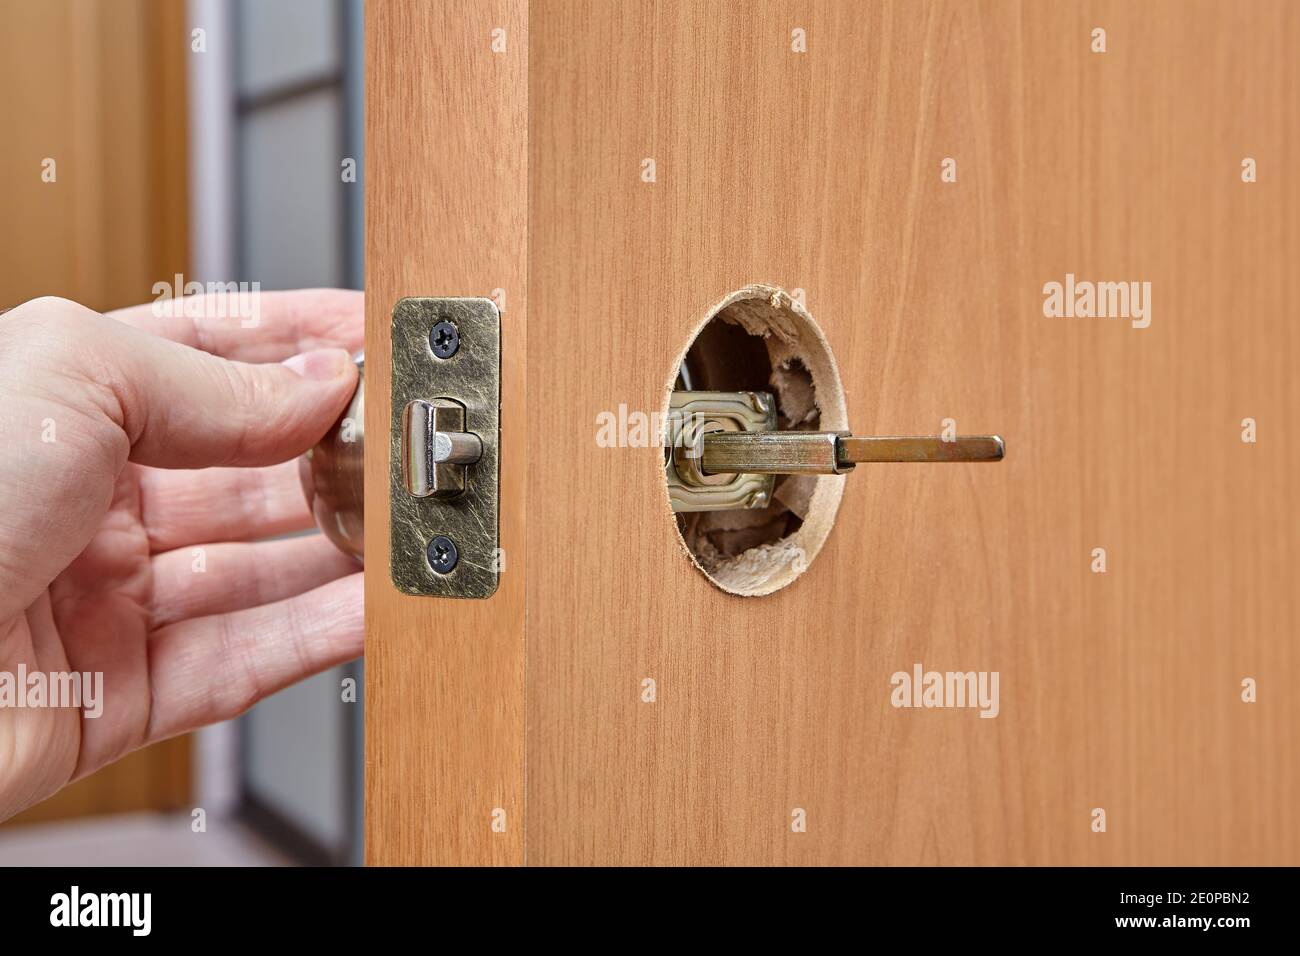 The installer pushes the spindle of door handle through the hole in the latch assembly and face bore. Stock Photo